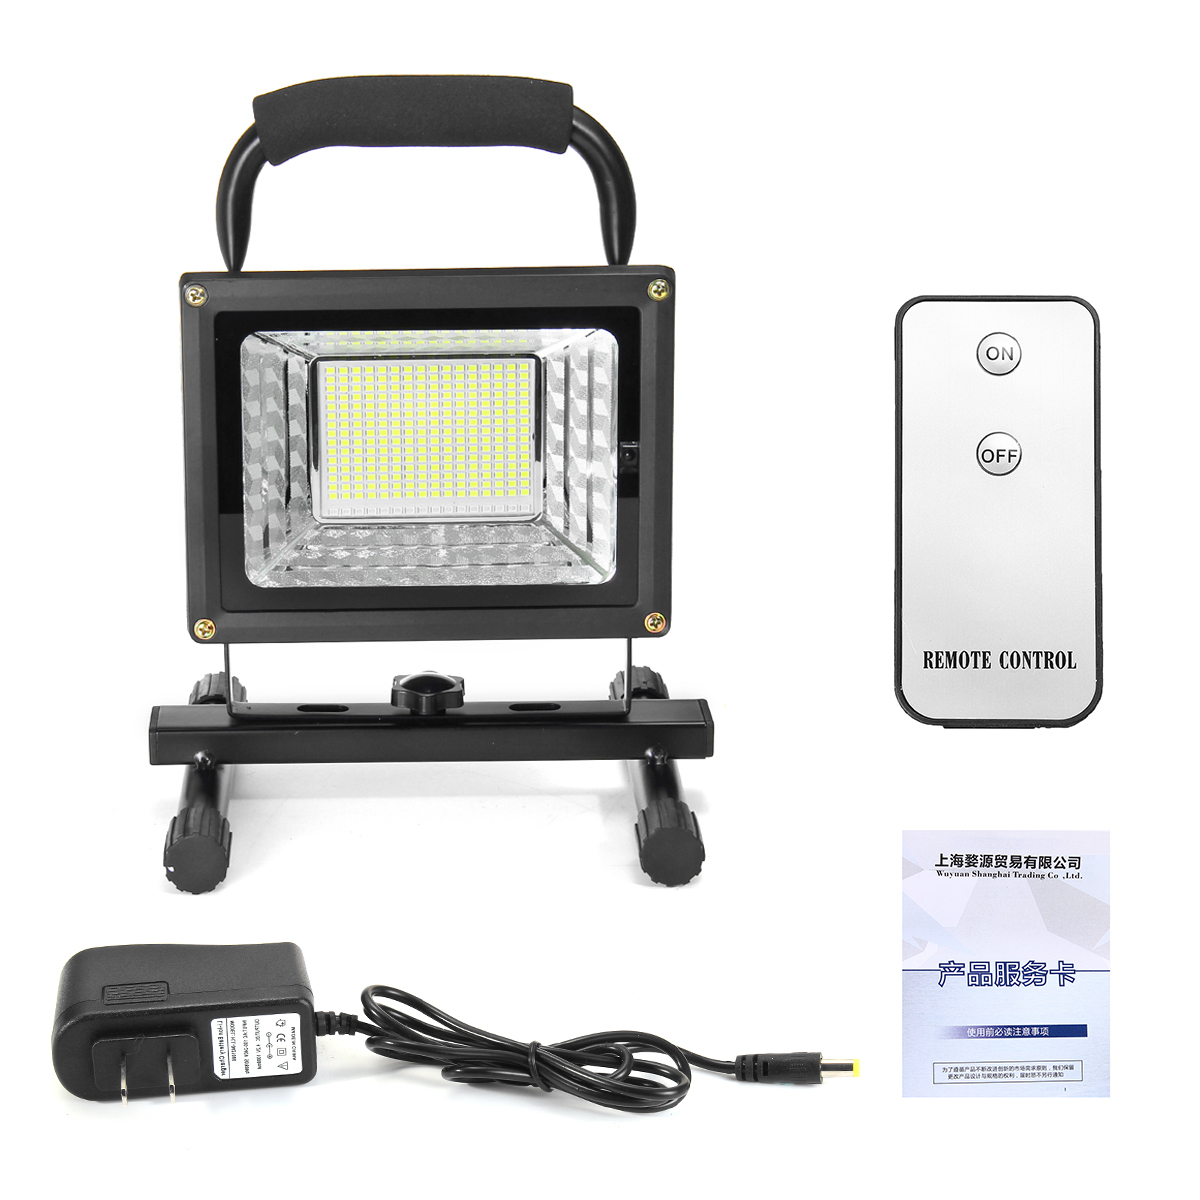 Find 900W 256 LED Portable Rechargeable Flood Spot Light Lawn Work Camping Flash Lamp Outdoor for Sale on Gipsybee.com with cryptocurrencies